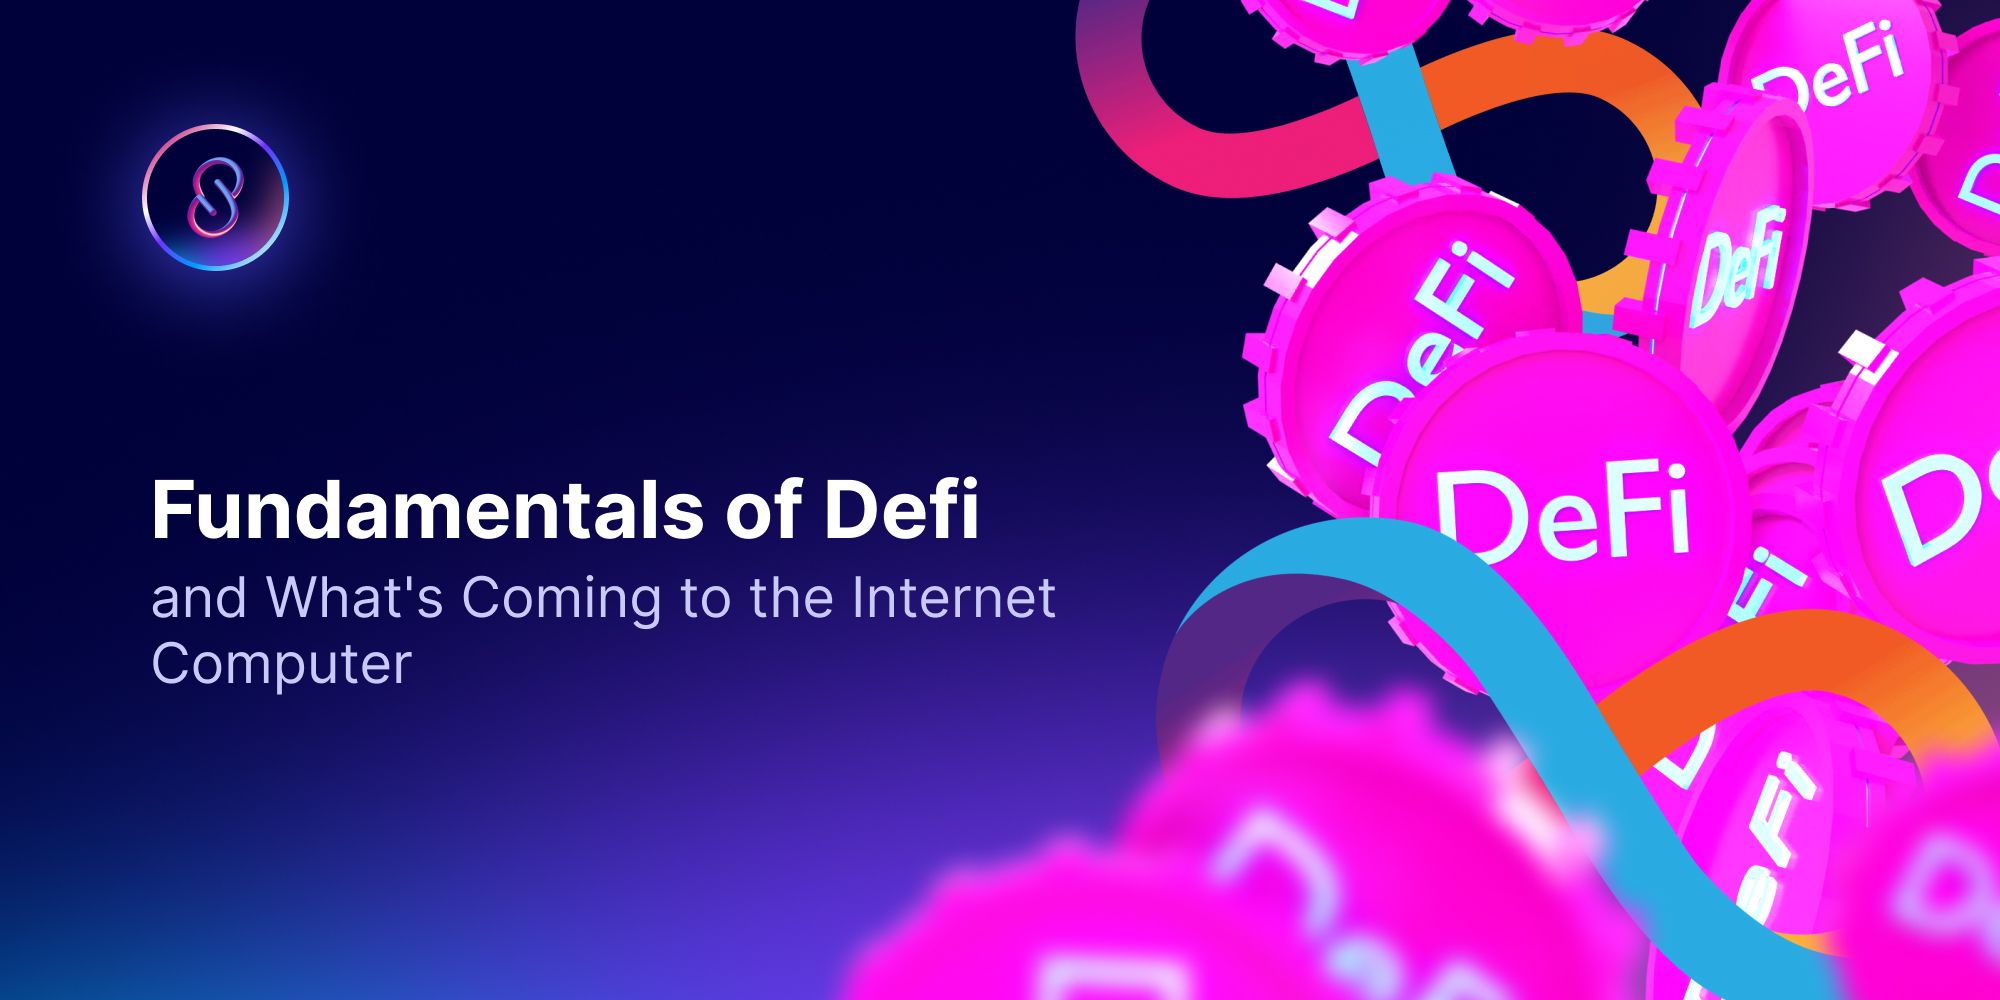 Fundamentals of Defi and What's Coming to the Internet Computer